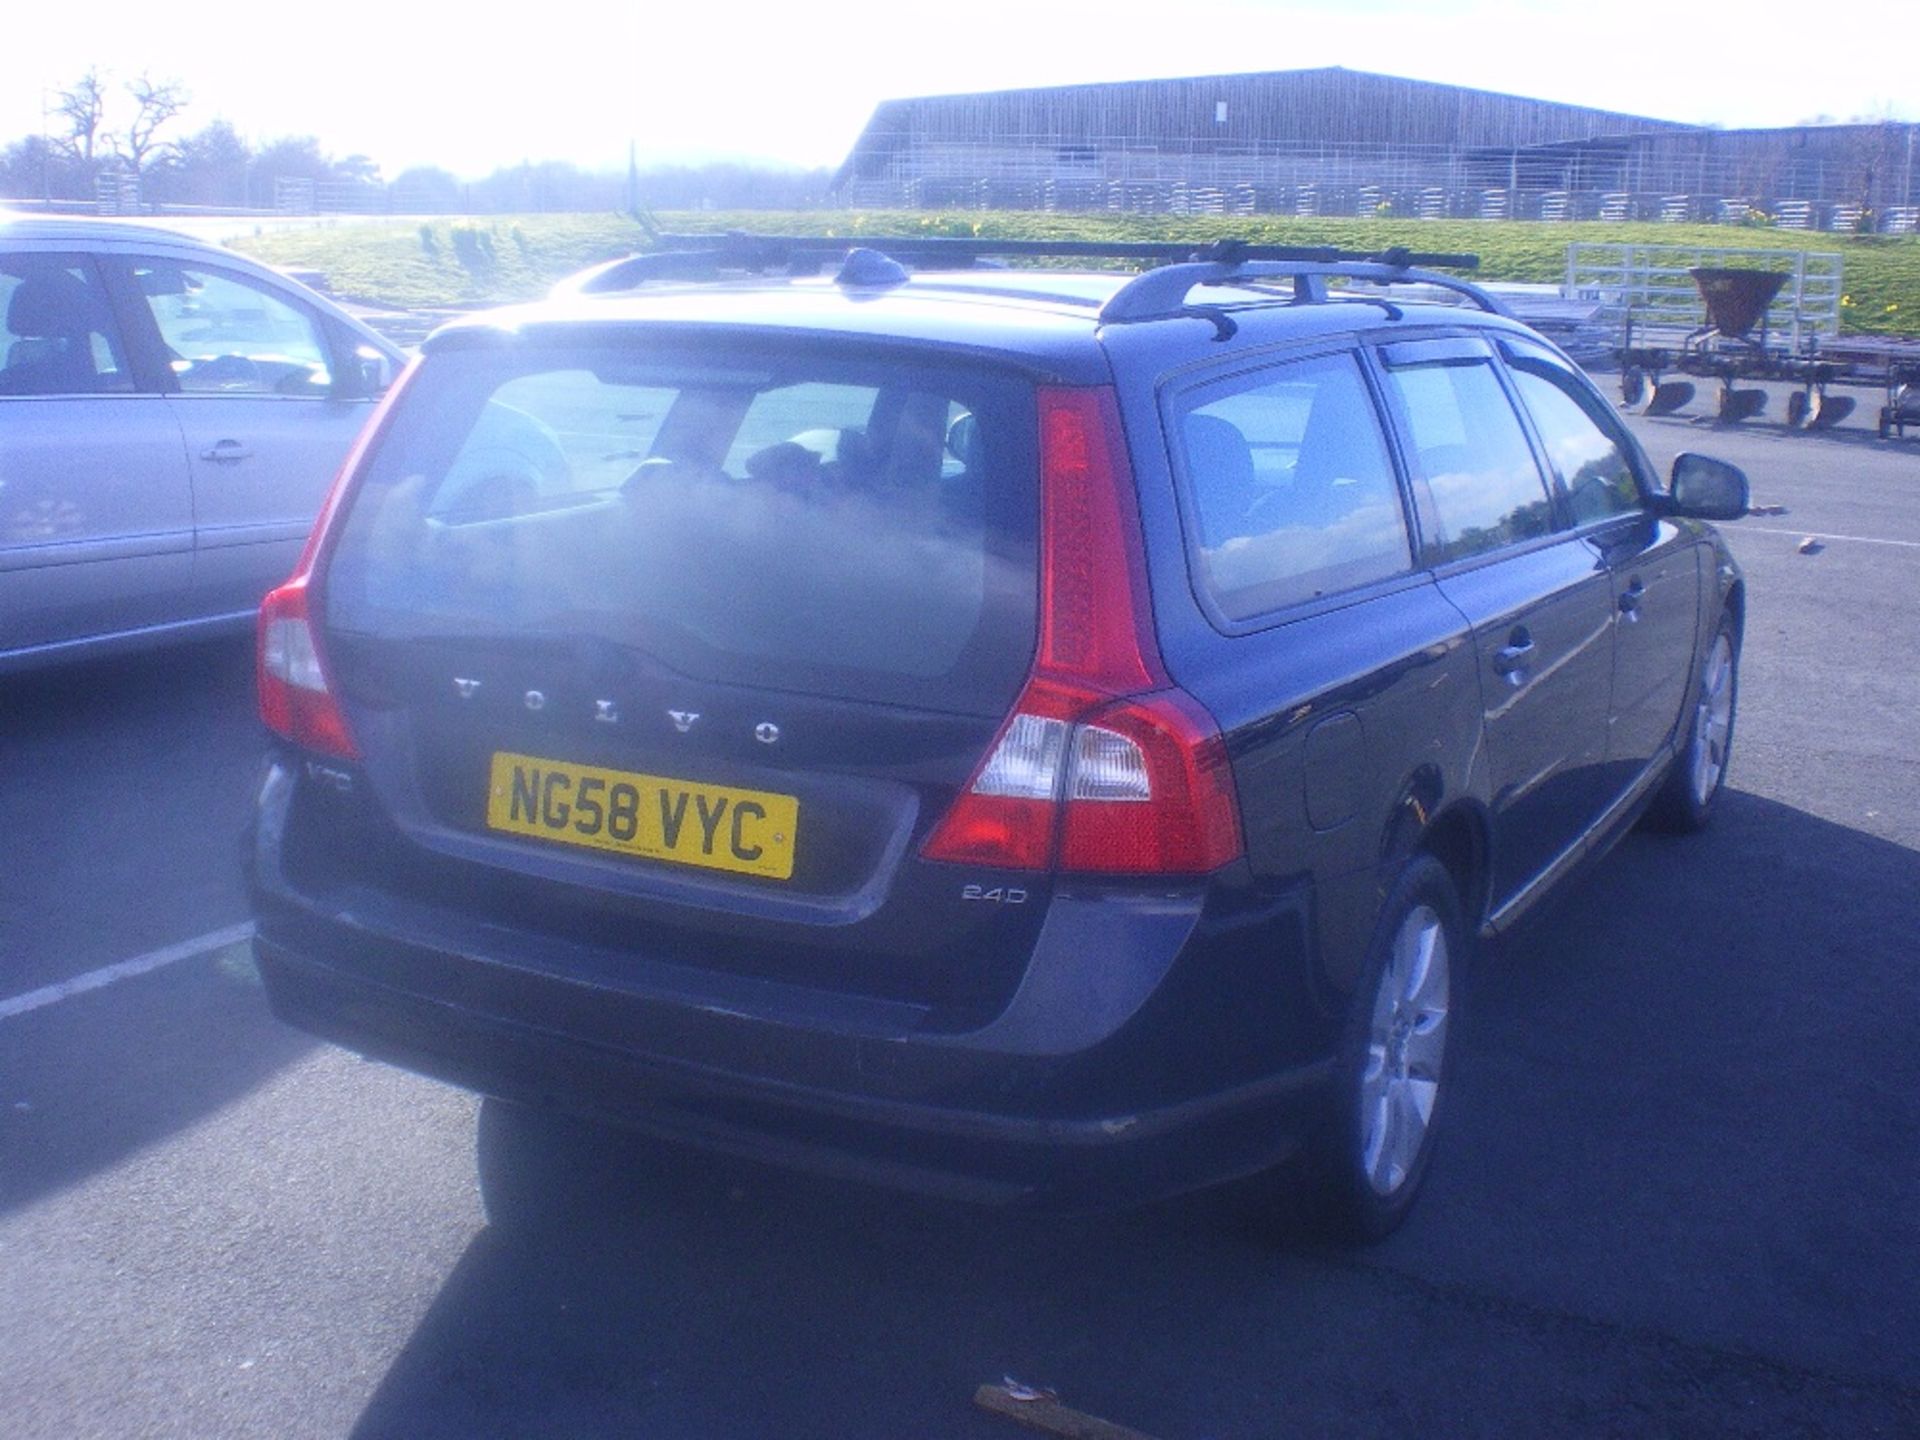 VOLVO CAR - NG58 VYC 103,209 MILES (APPROX) - Image 4 of 4